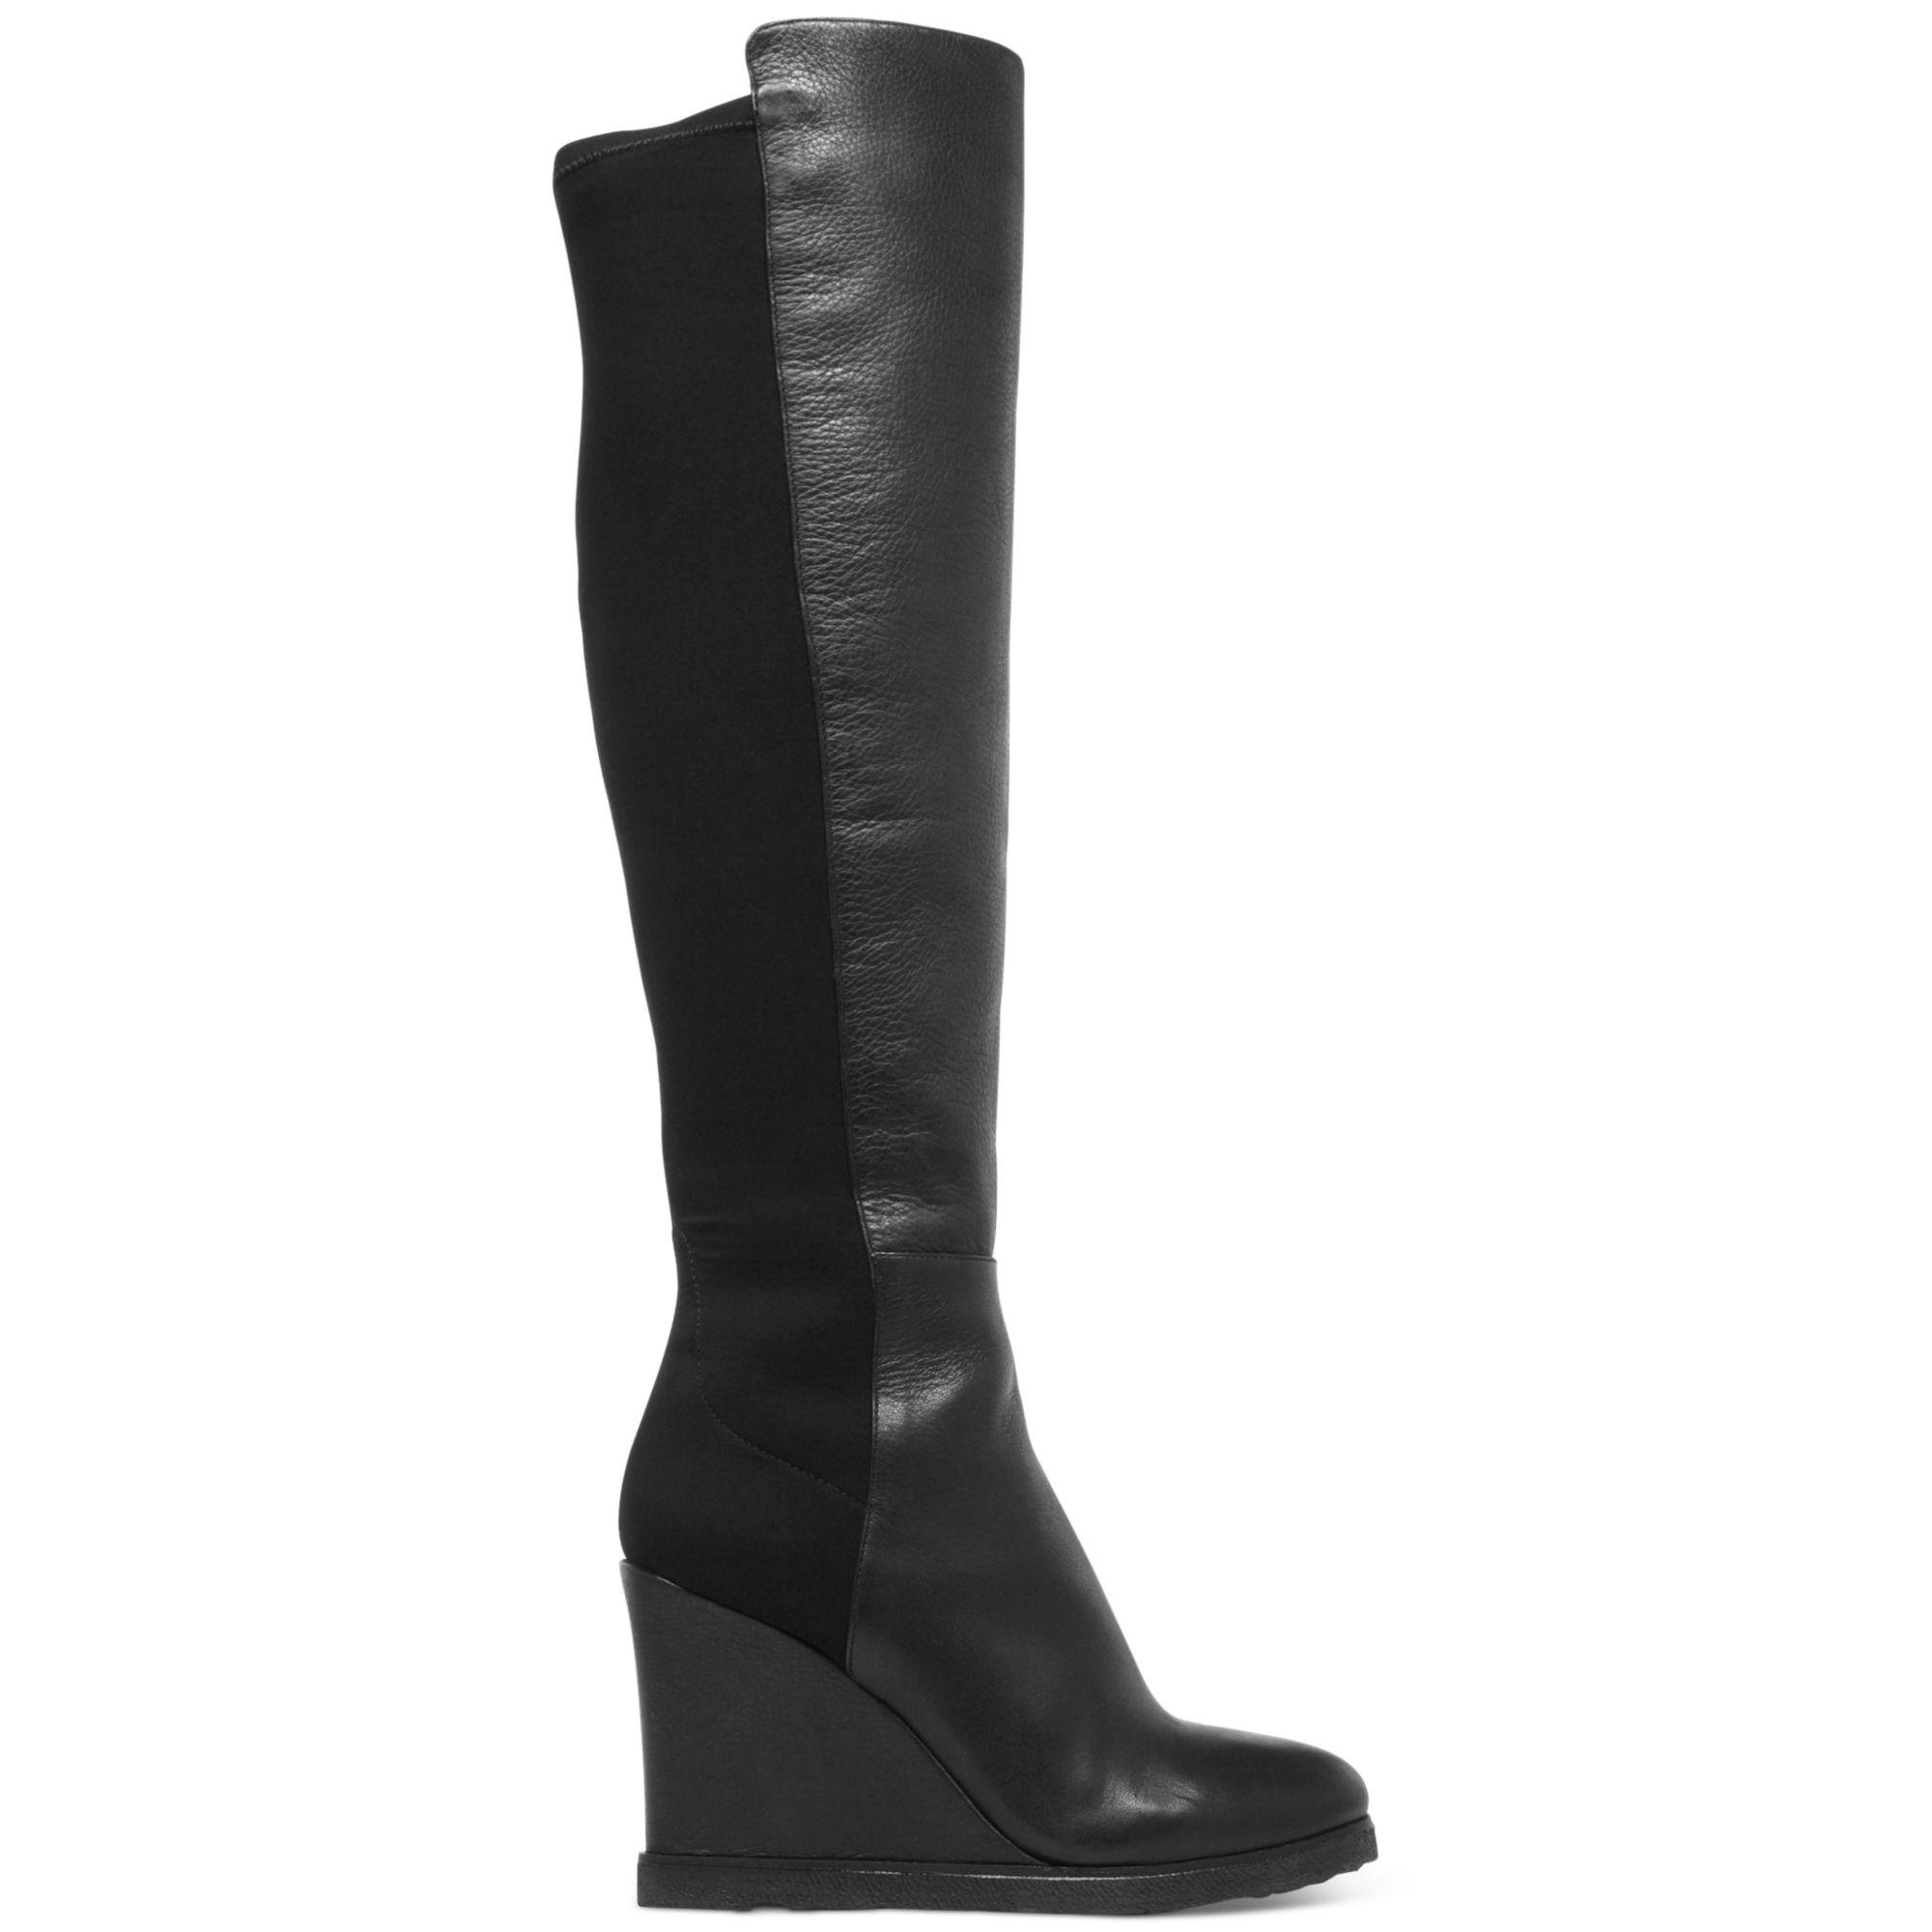 Vince Camuto Kaelen Tall Wedge Boots in Black (Black Suede/Stretch) | Lyst